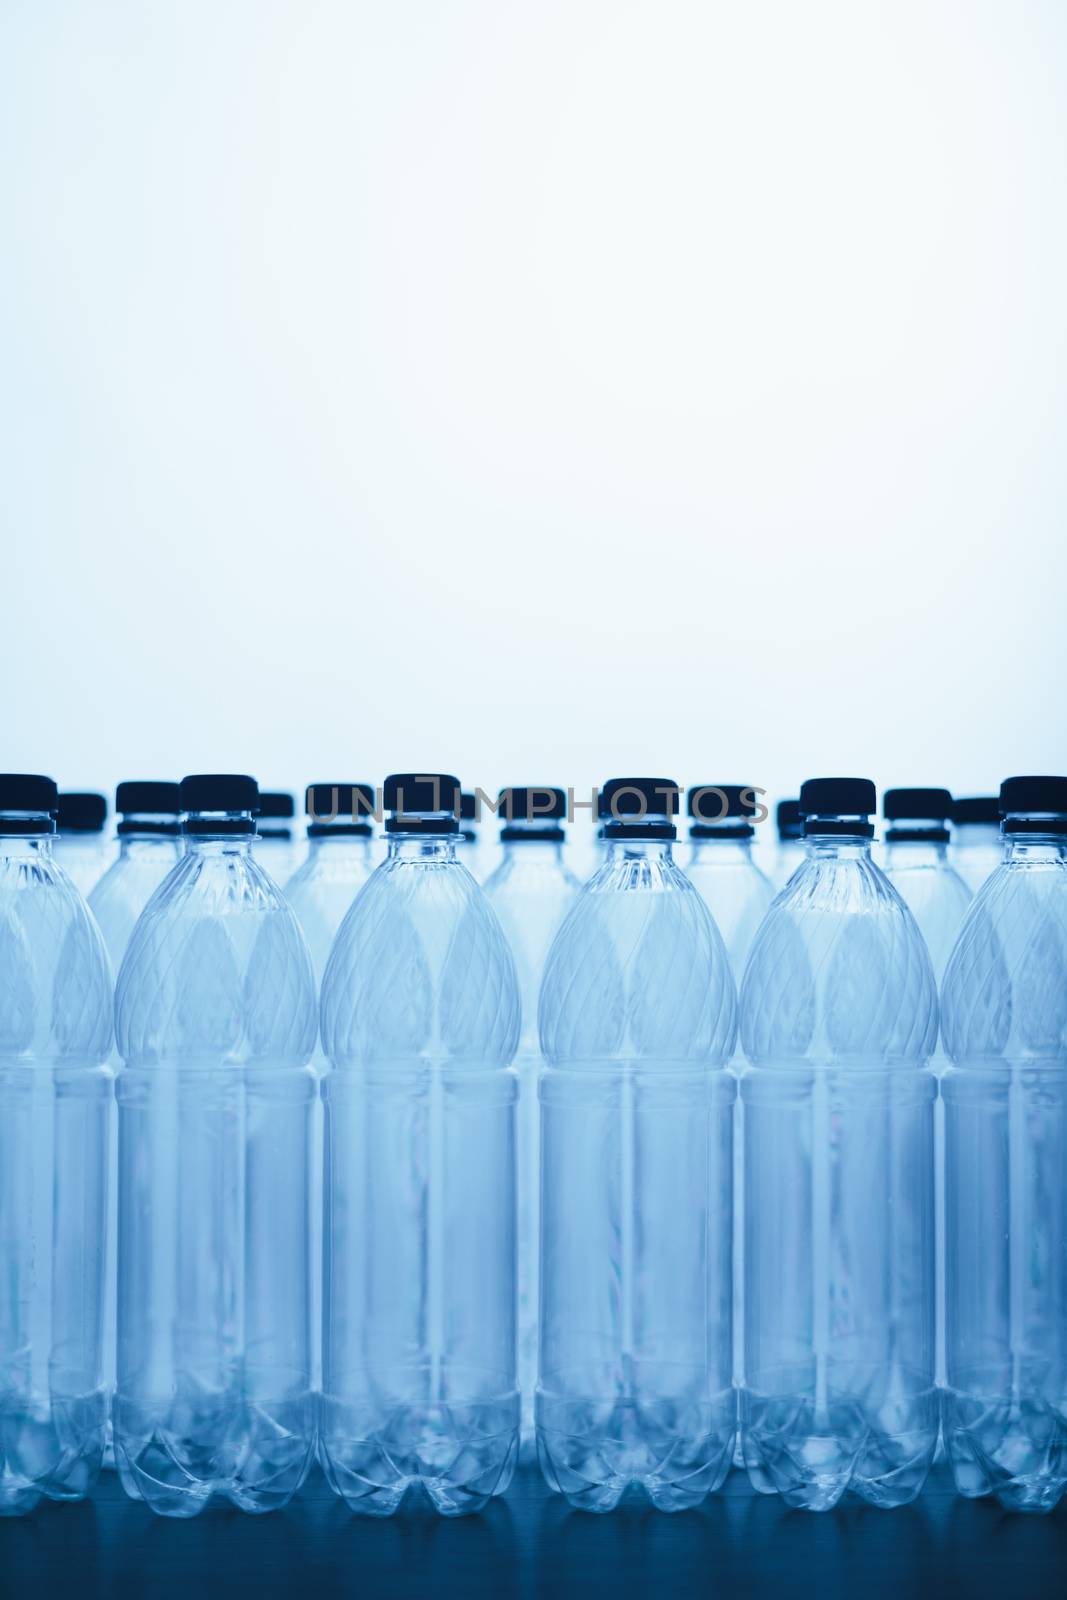 empty plastic bottle silhouettes on blue background